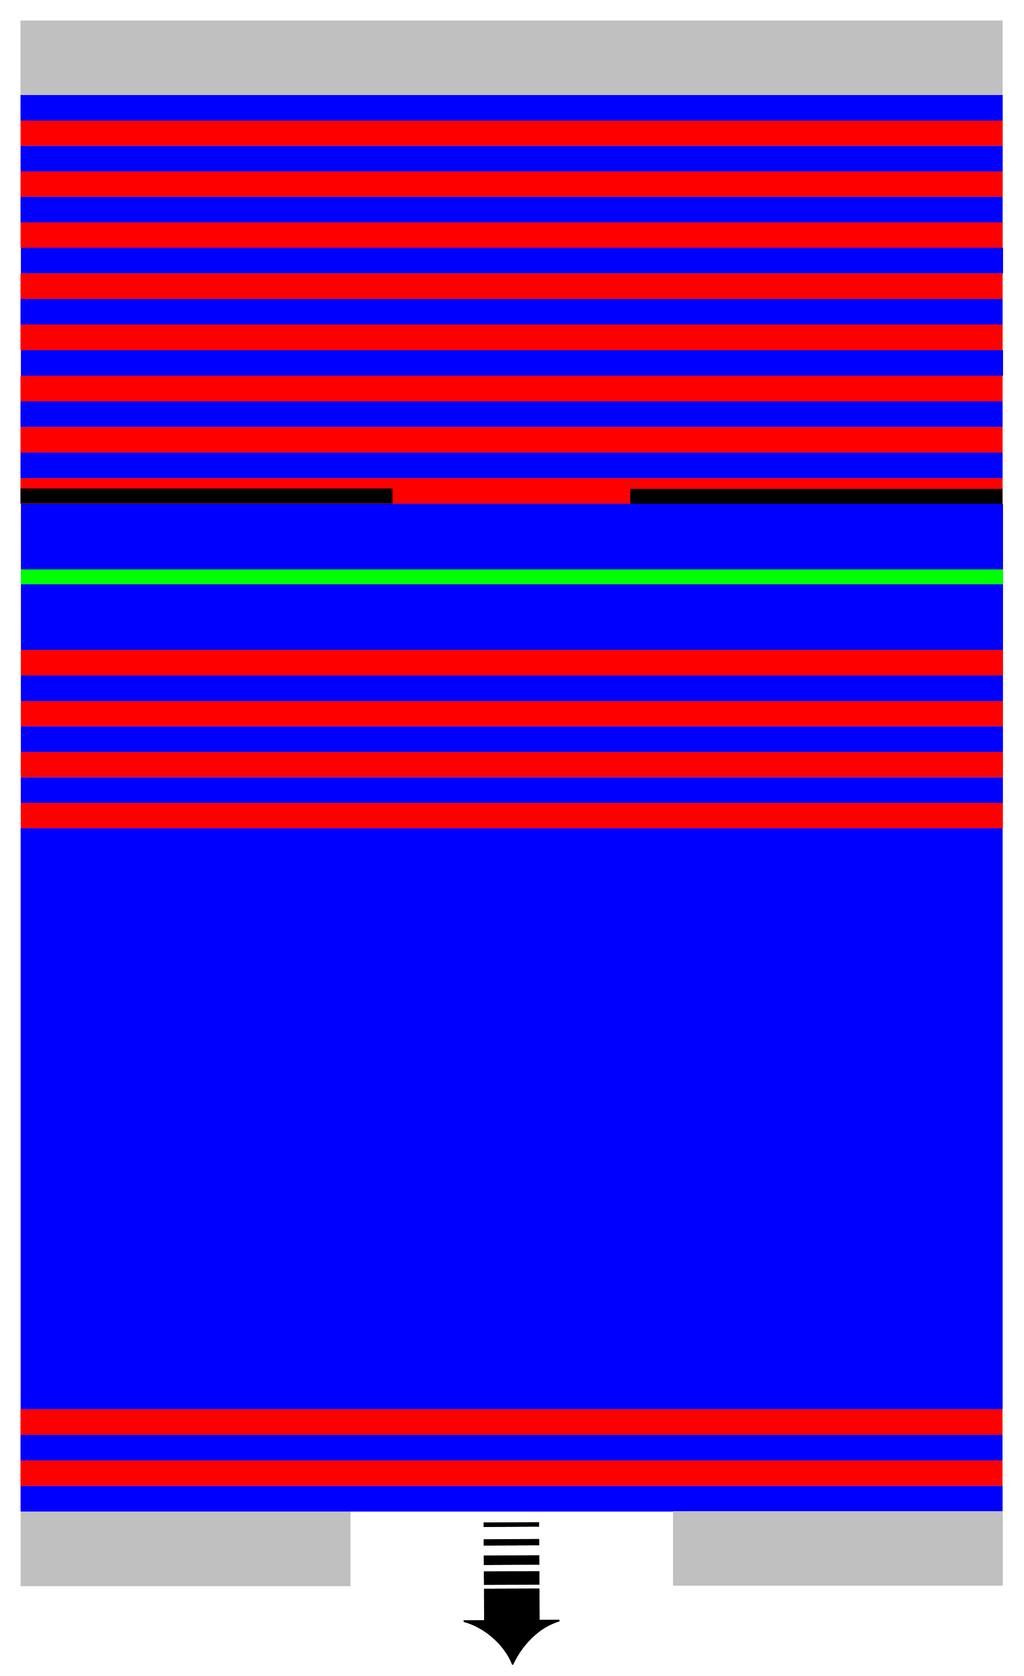 Figure 1: Schematic of the benchmark CCBE-VCSEL structure, consisting of two optical cavities (blue), formed by three DBRs (red and blue stripes).